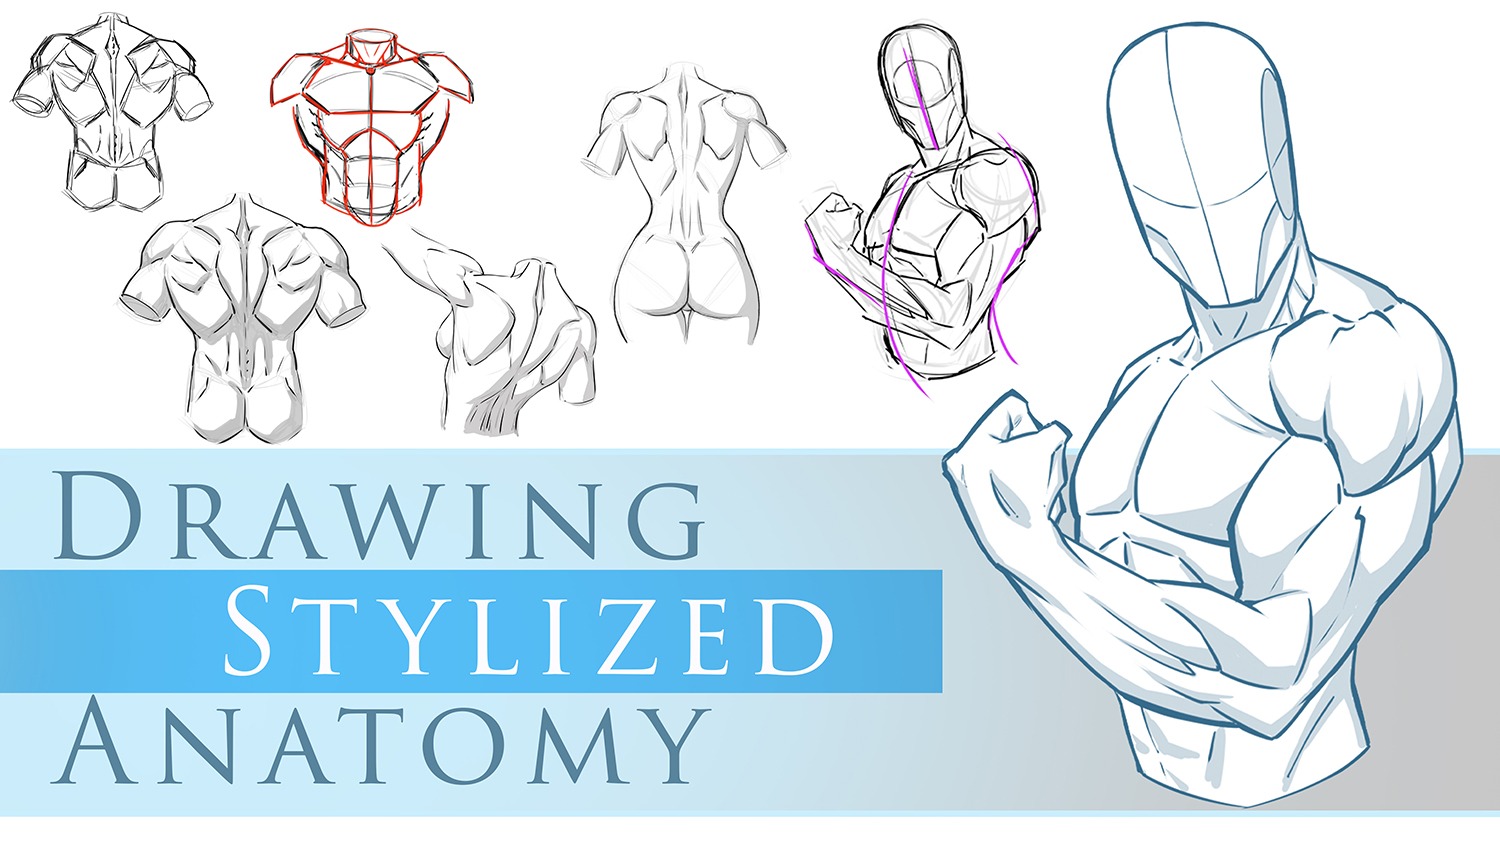 Human Anatomy Drawing tips | 2 Parts by A-New-Deviant on DeviantArt